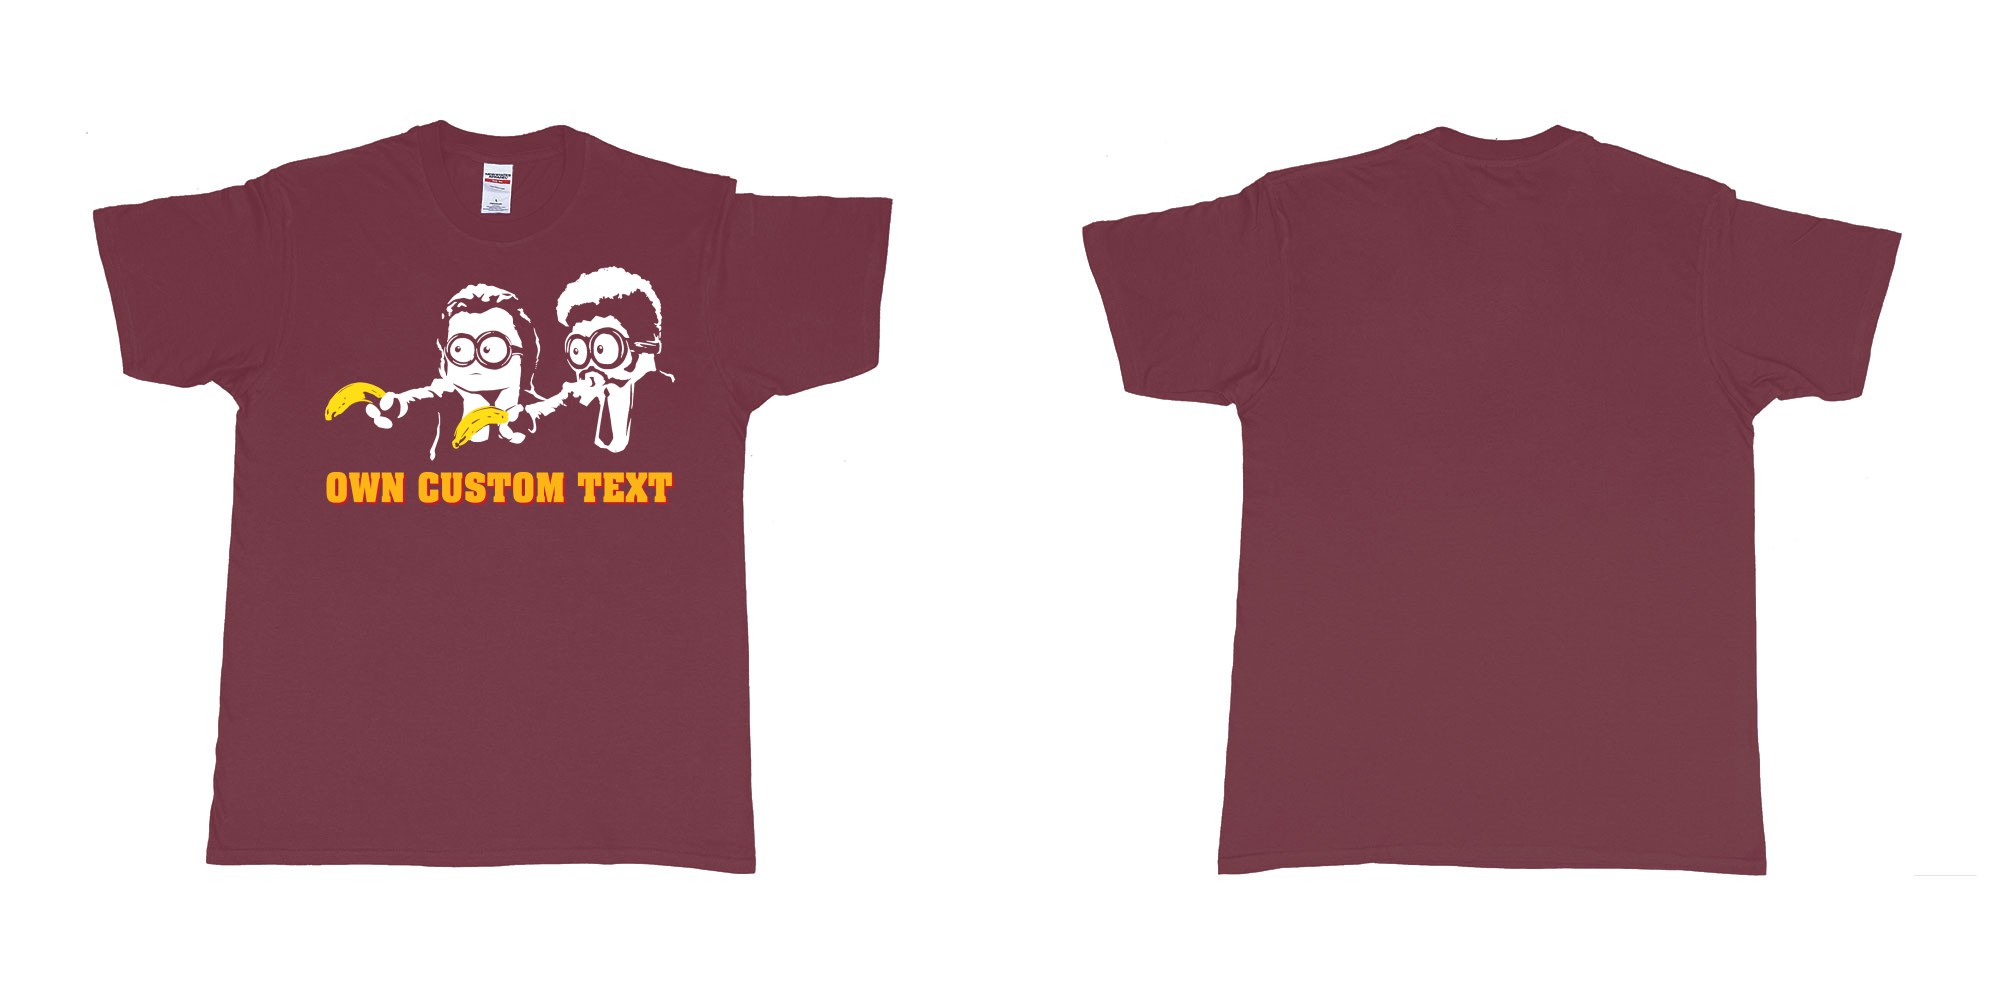 Custom tshirt design minions pulp fiction in fabric color marron choice your own text made in Bali by The Pirate Way